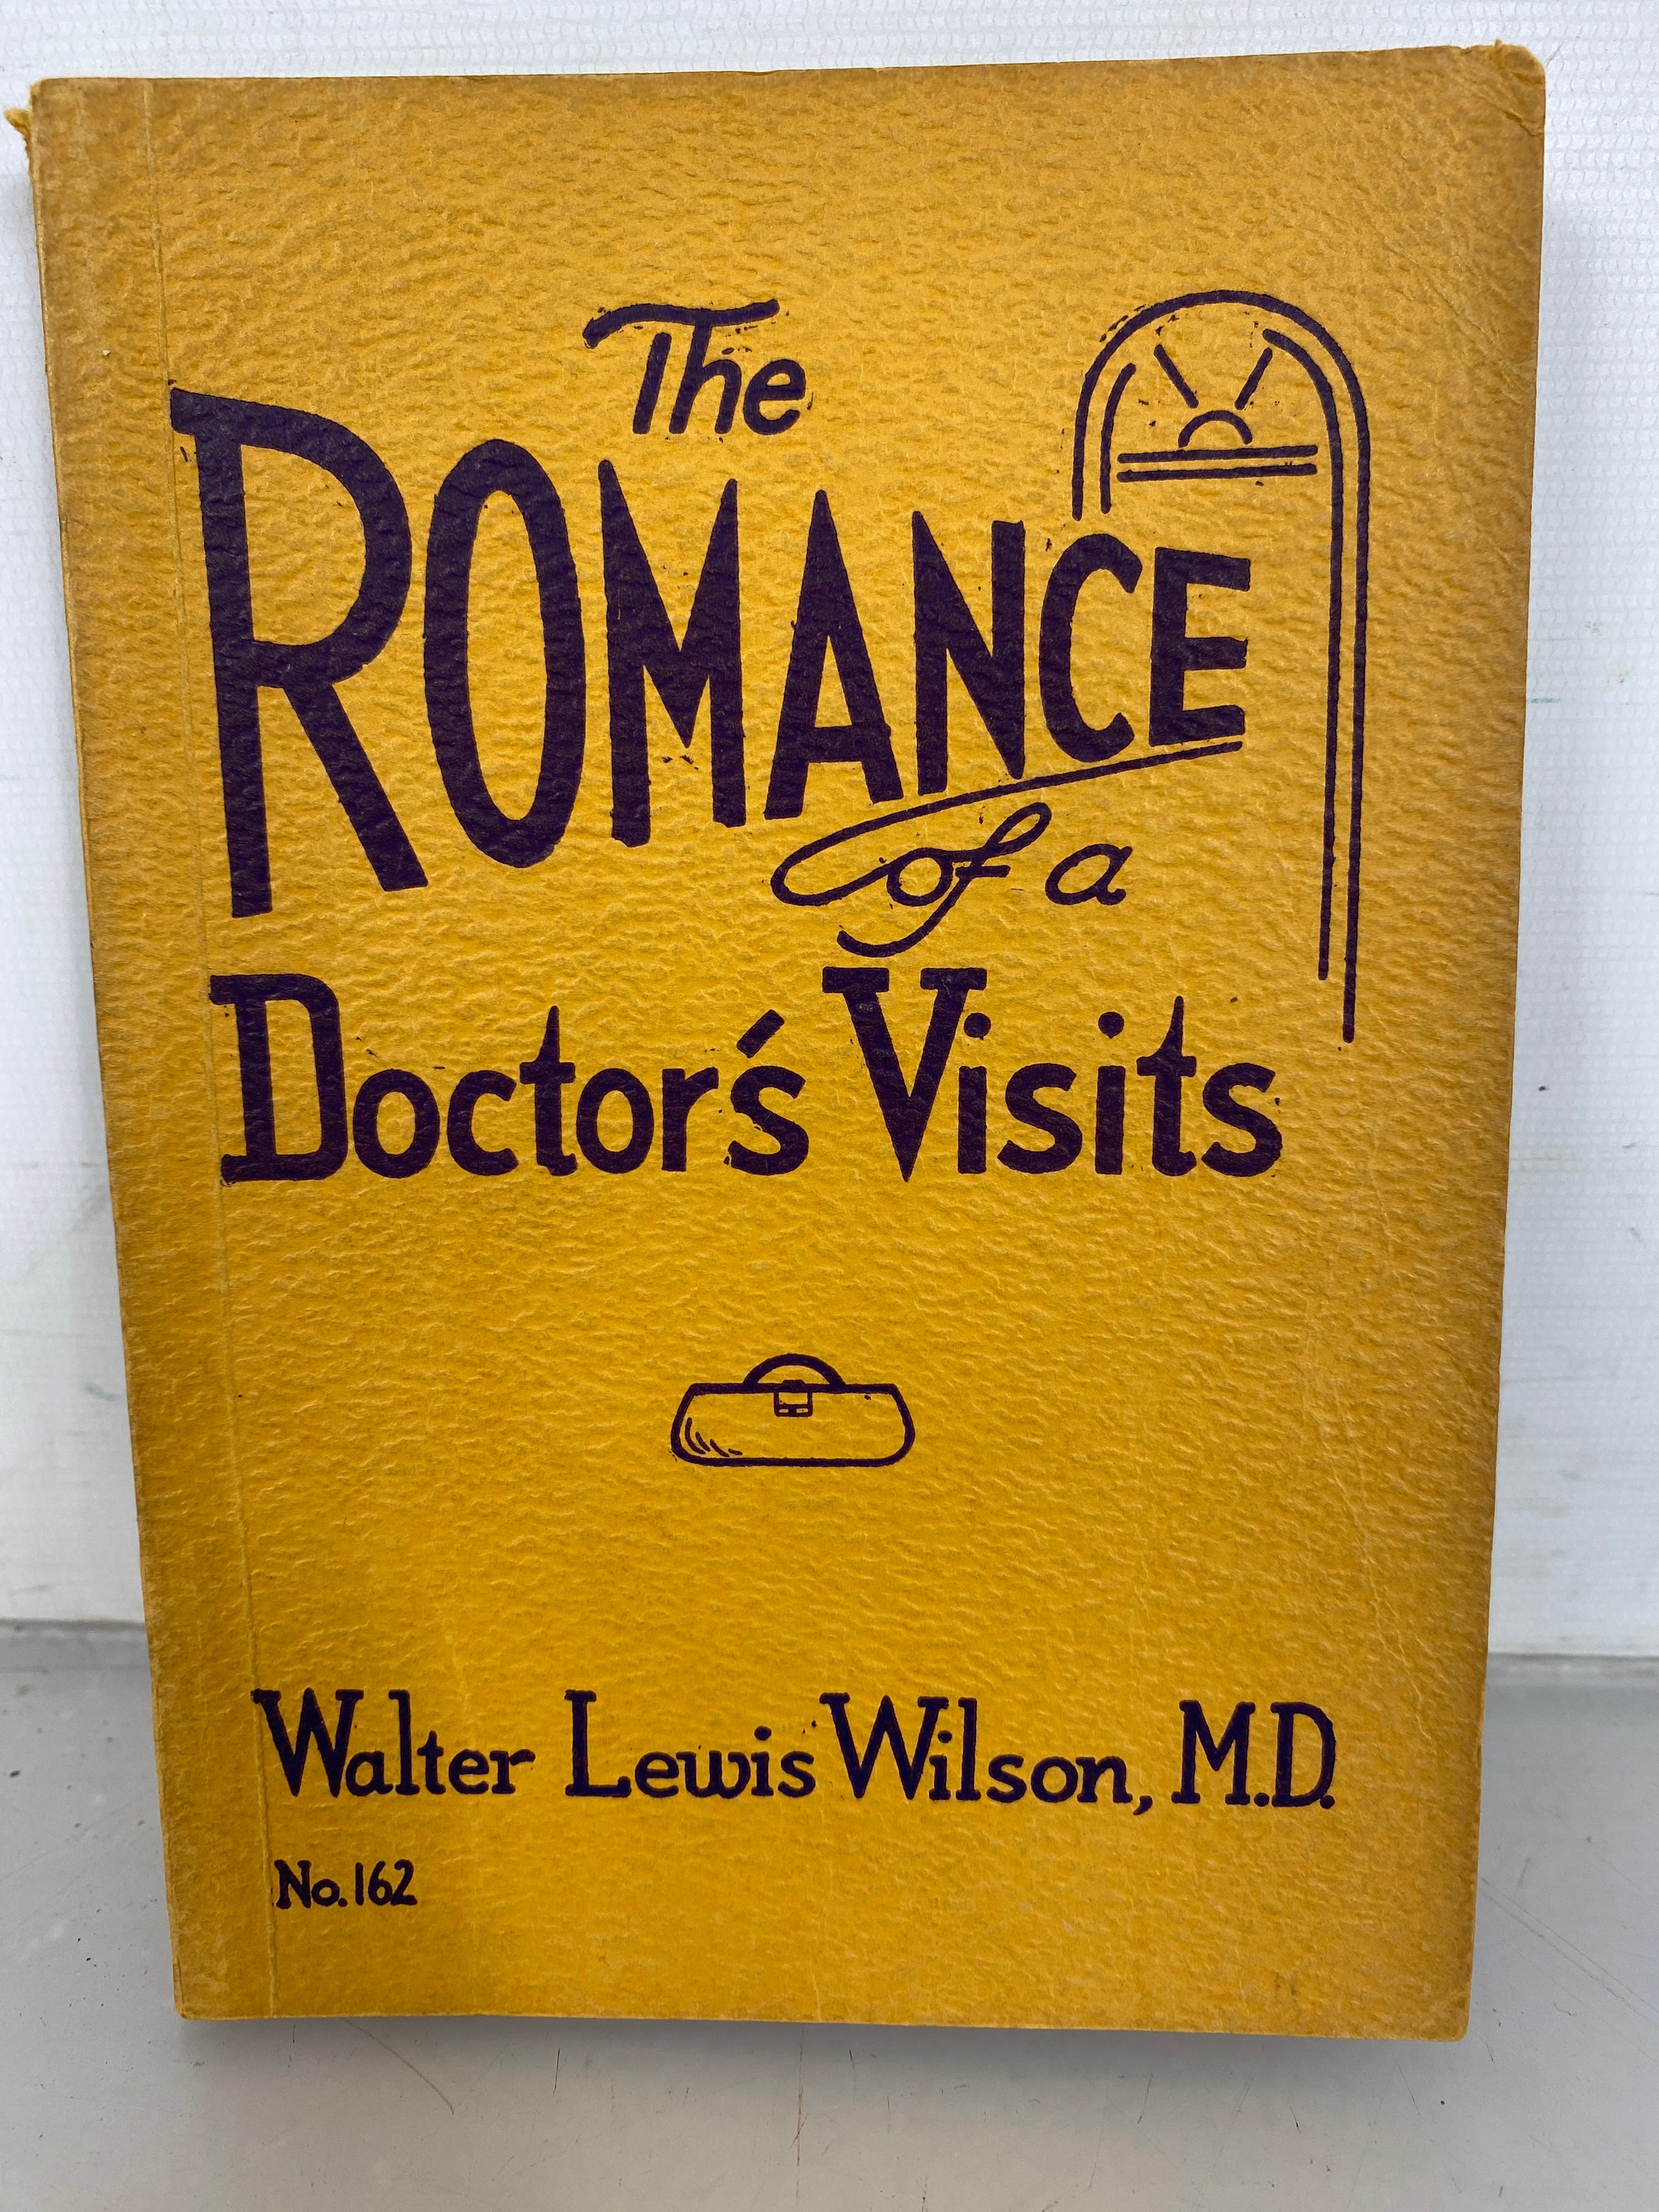 The Romance of a Doctor's Visits by Walter Lewis Wilson 1935 SC